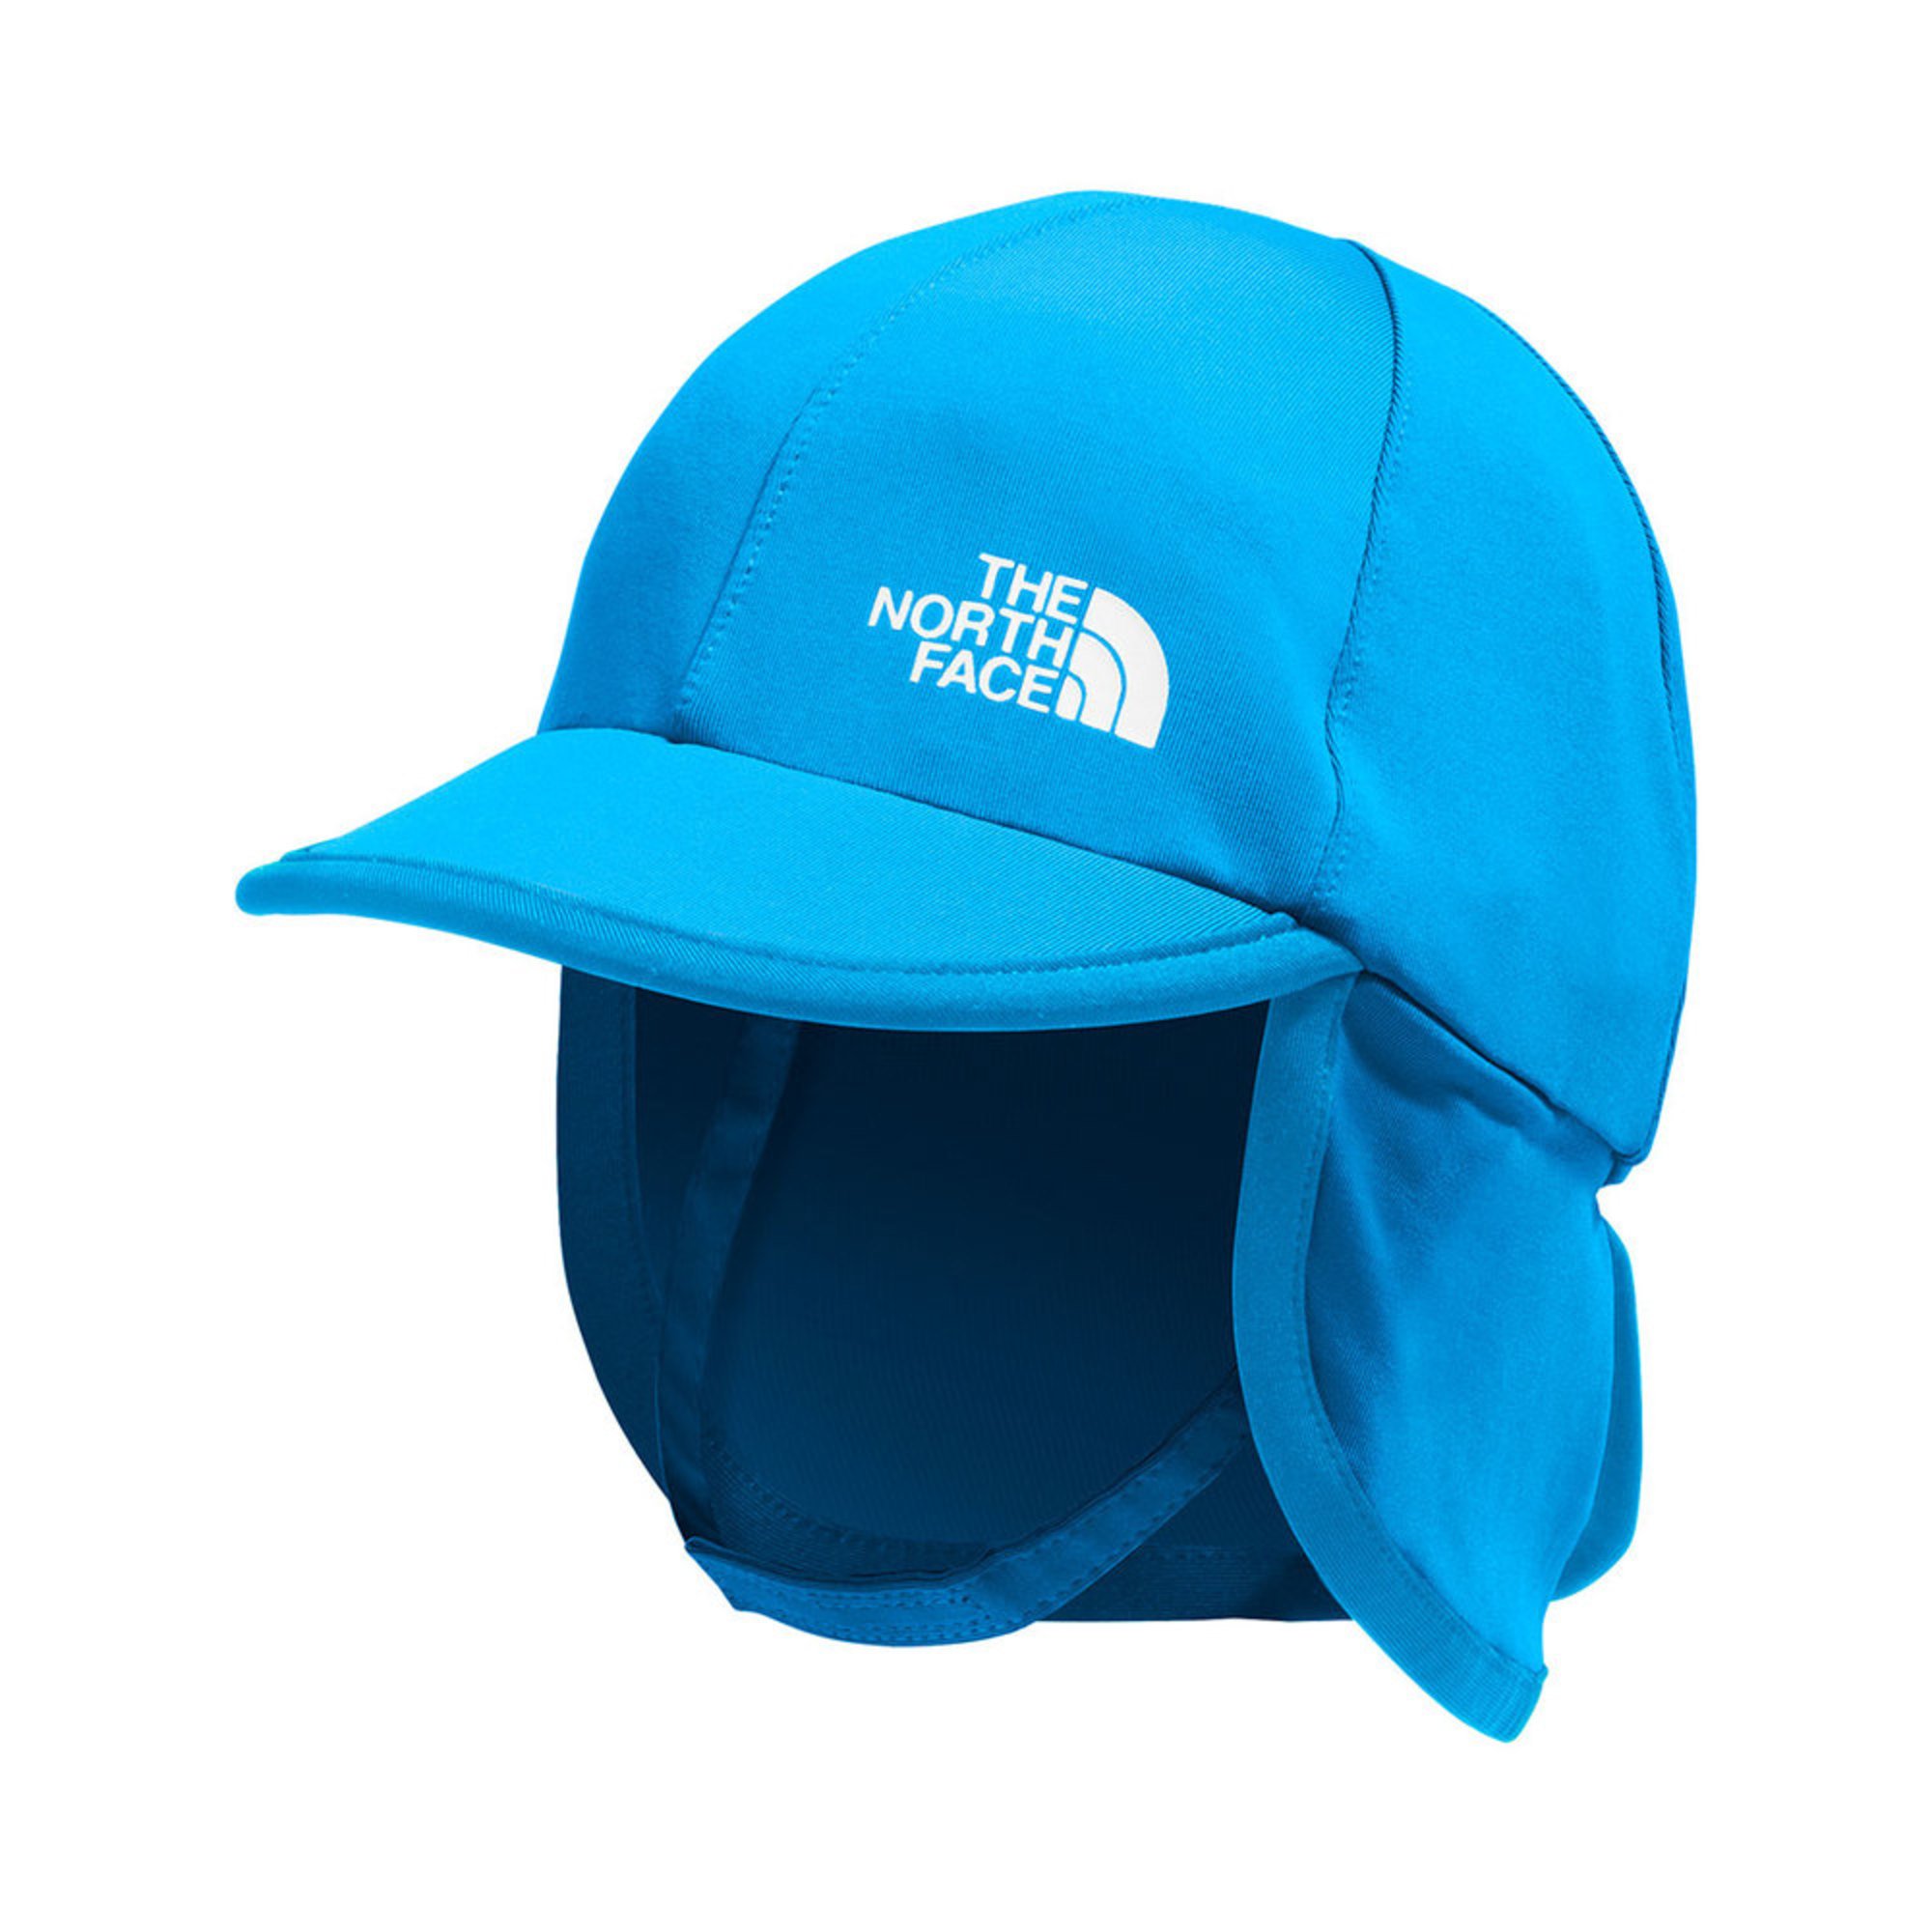 The North Face Baby Boys' Sun Buster Hat | Baby Hats, Caps & Headbands ...